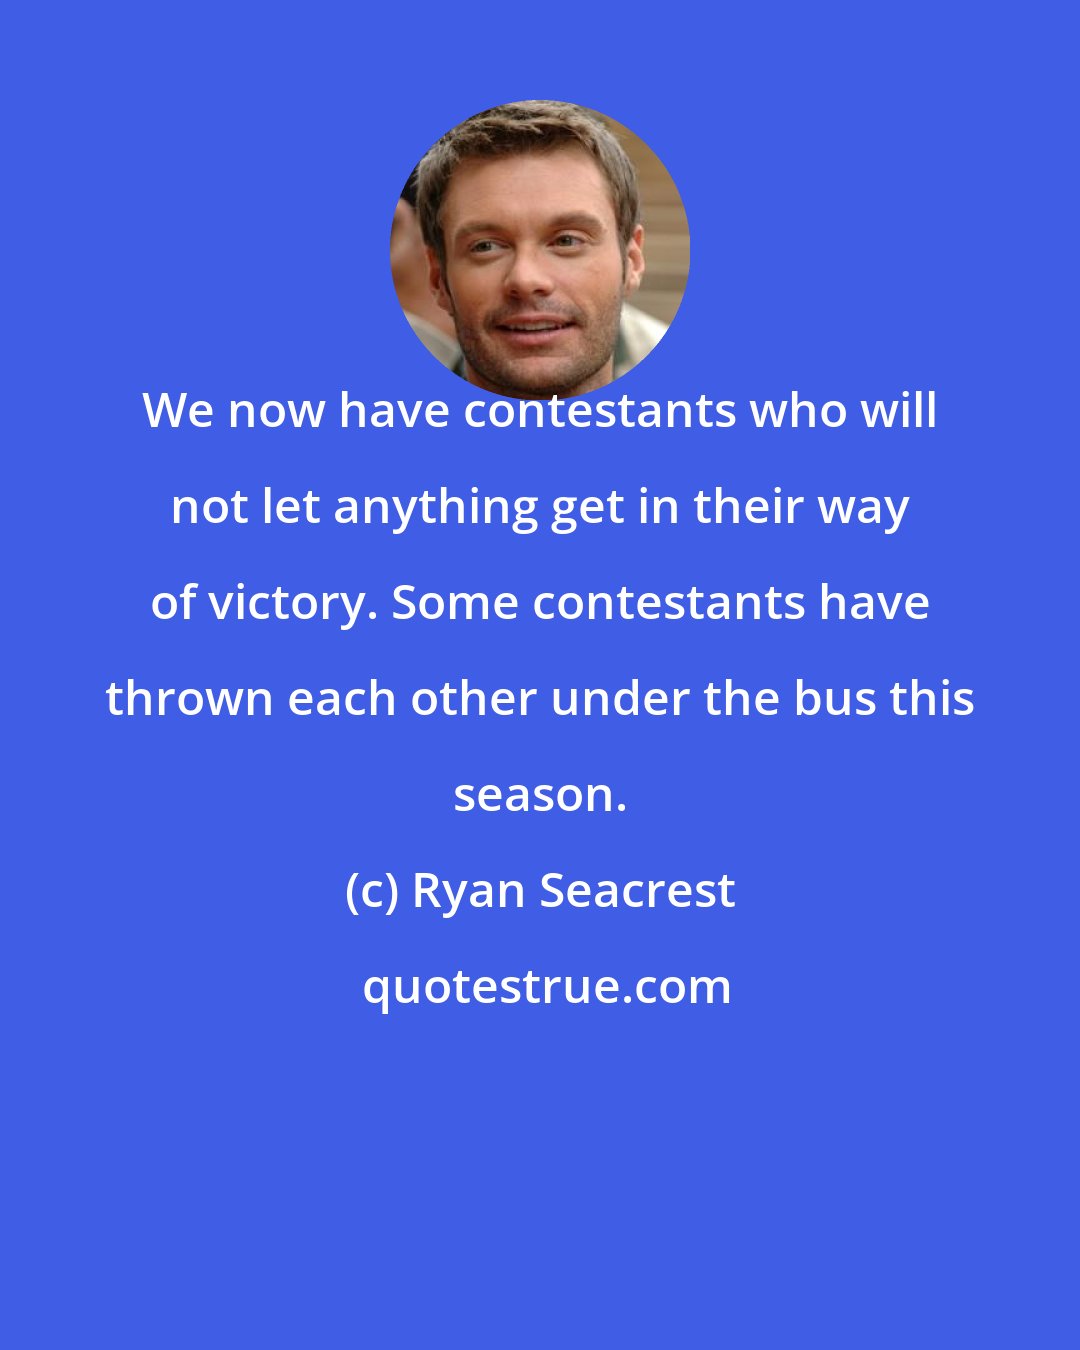 Ryan Seacrest: We now have contestants who will not let anything get in their way of victory. Some contestants have thrown each other under the bus this season.